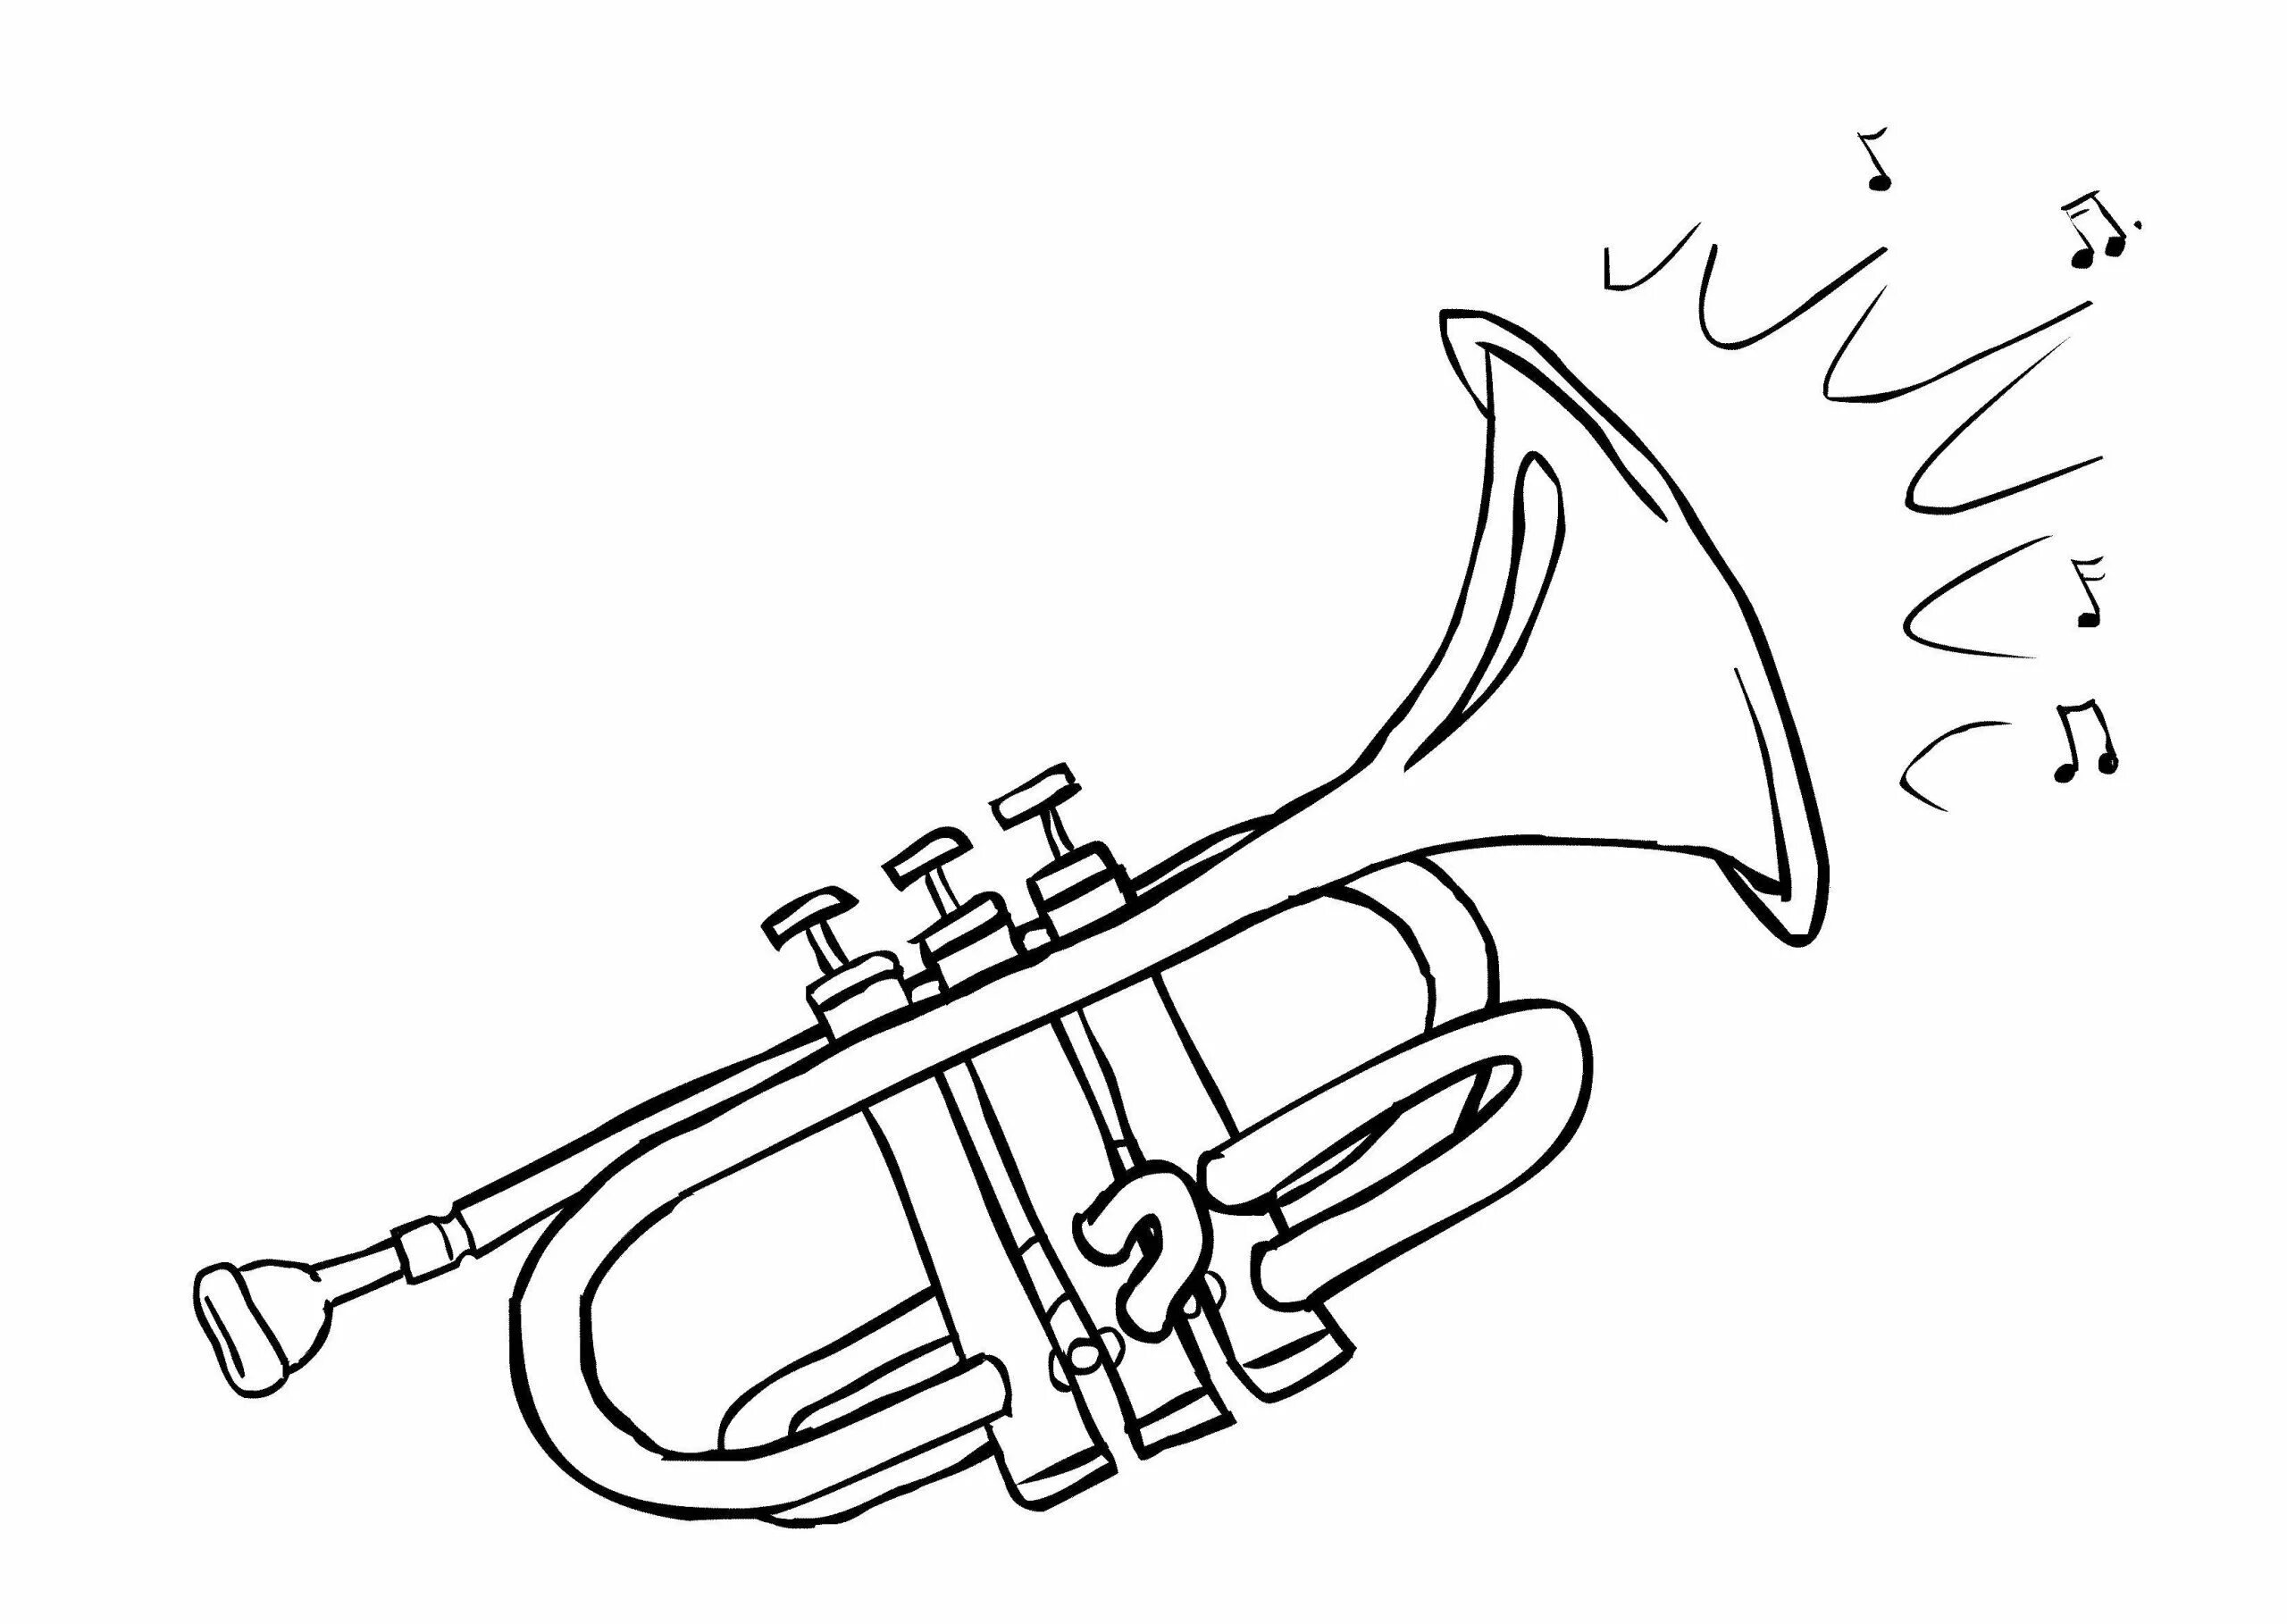 Coloring page with brass instruments